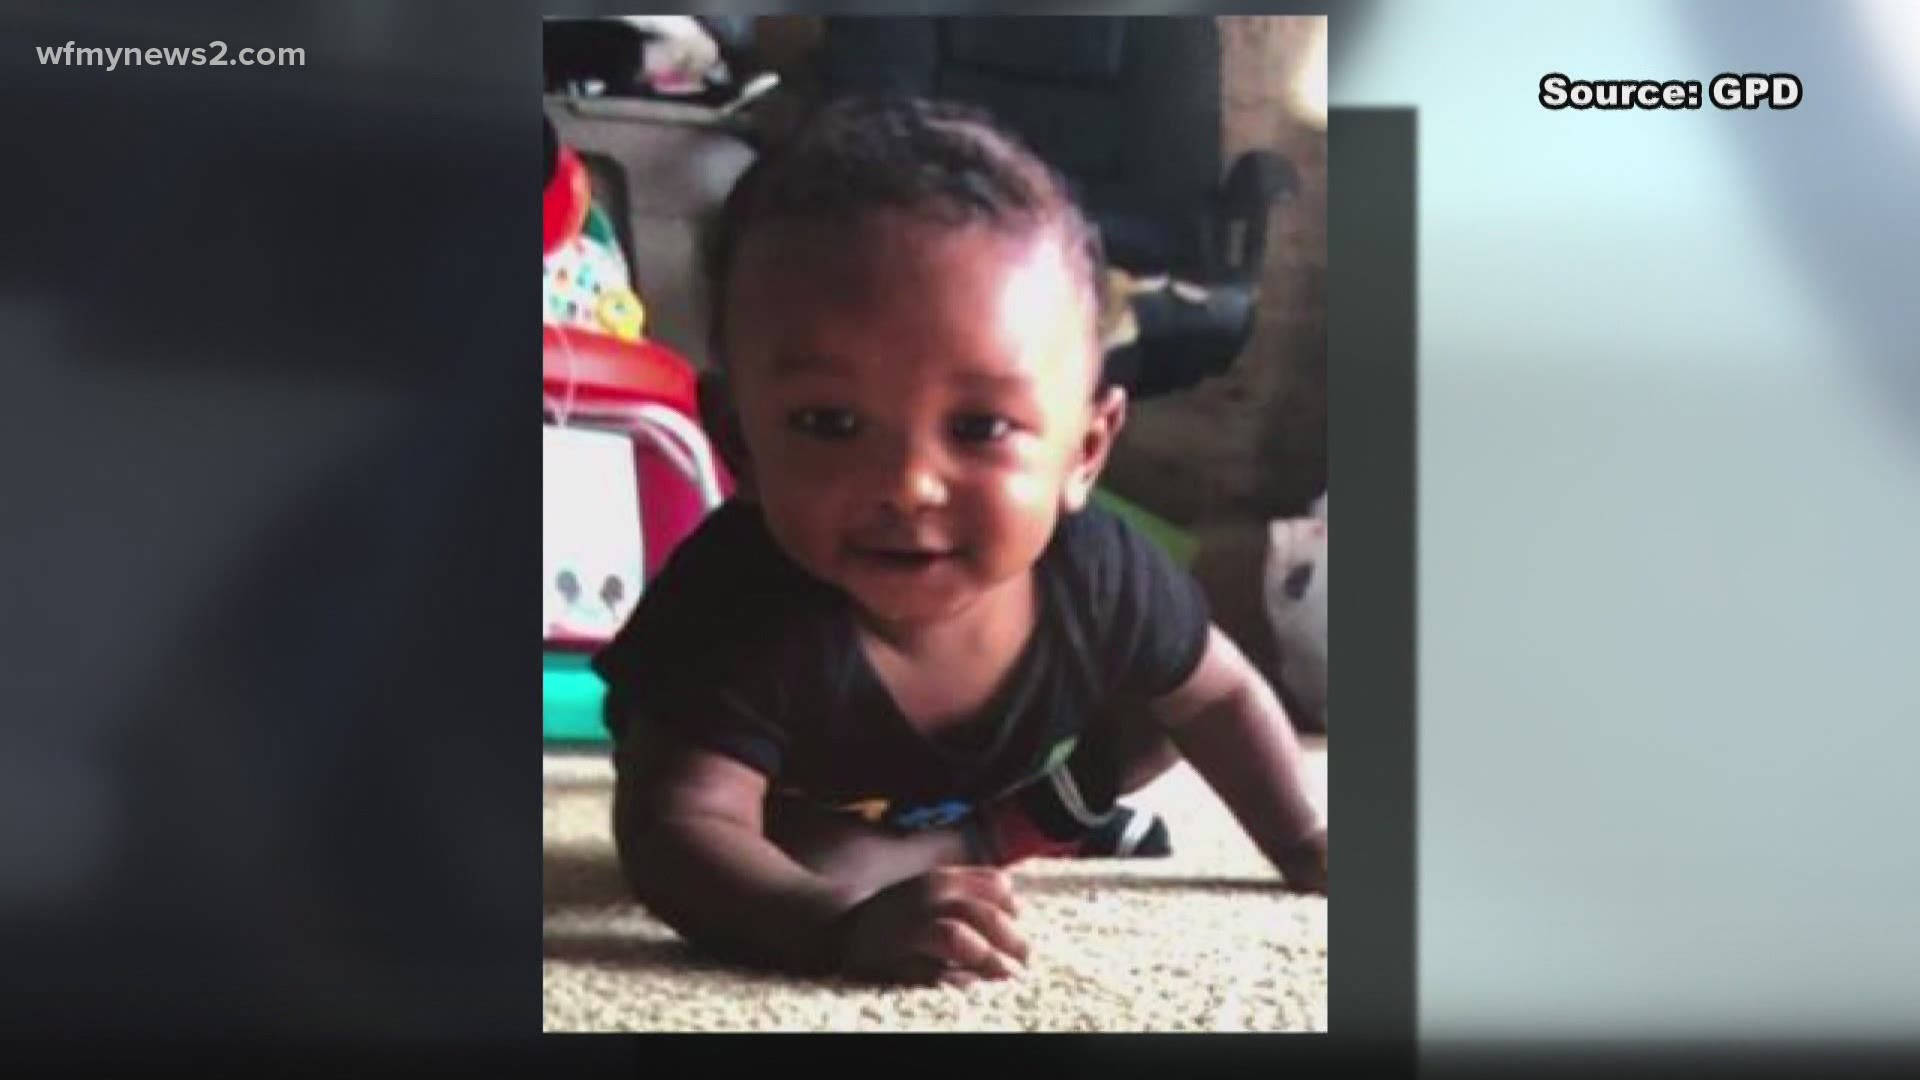 The incident in Greensboro sparked an Amber Alert. The baby was later found safe in someone's yard.